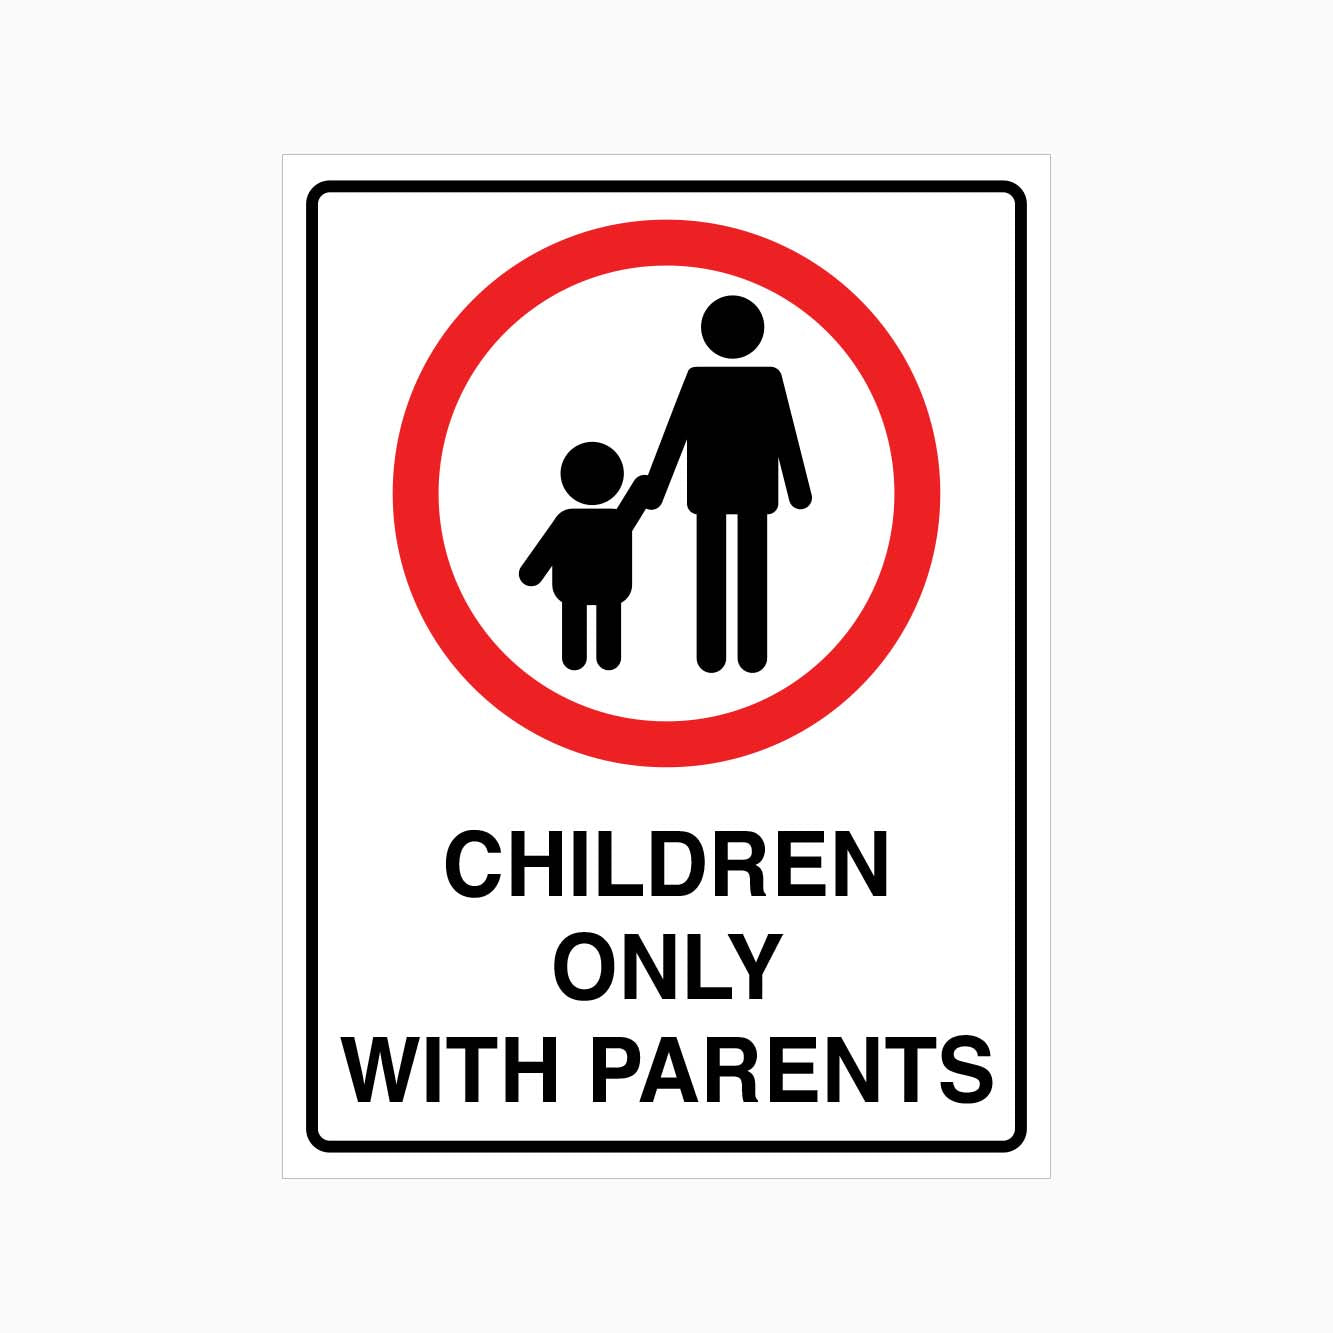 CHILDREN ONLY WITH PARENTS SIGN - GET SIGNS